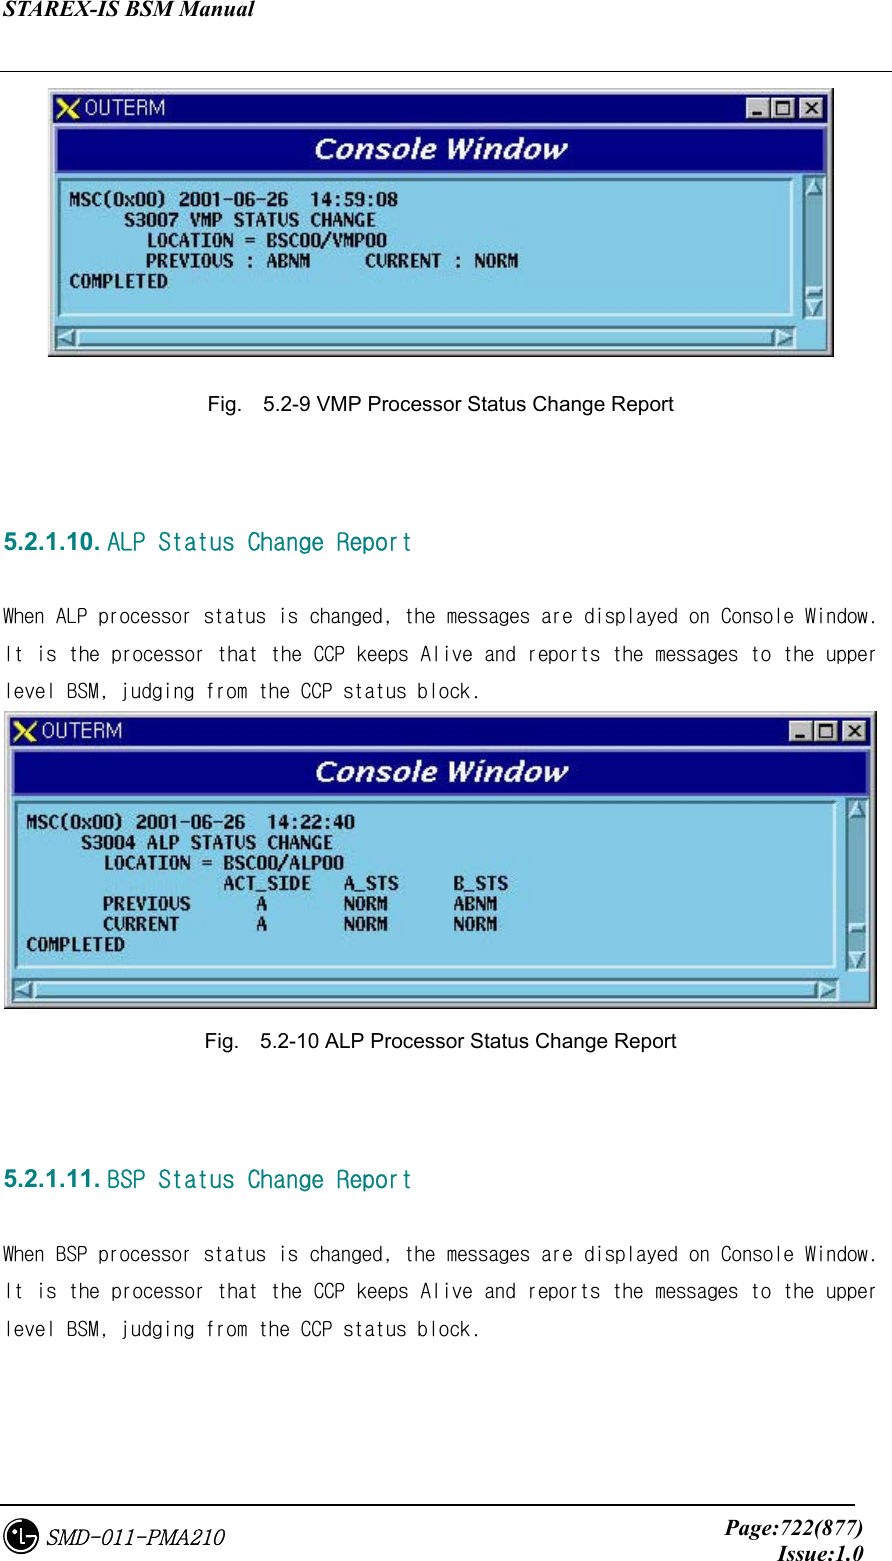 STAREX-IS BSM Manual     Page:722(877)Issue:1.0SMD-011-PMA210  Fig.    5.2-9 VMP Processor Status Change Report   5.2.1.10. ALP Status Change Report  When ALP processor status is changed, the messages are displayed on Console Window. It is the processor that the CCP keeps Alive and reports the messages to the upper level BSM, judging from the CCP status block.  Fig.    5.2-10 ALP Processor Status Change Report   5.2.1.11. BSP Status Change Report  When BSP processor status is changed, the messages are displayed on Console Window. It is the processor that the CCP keeps Alive and reports the messages to the upper level BSM, judging from the CCP status block. 